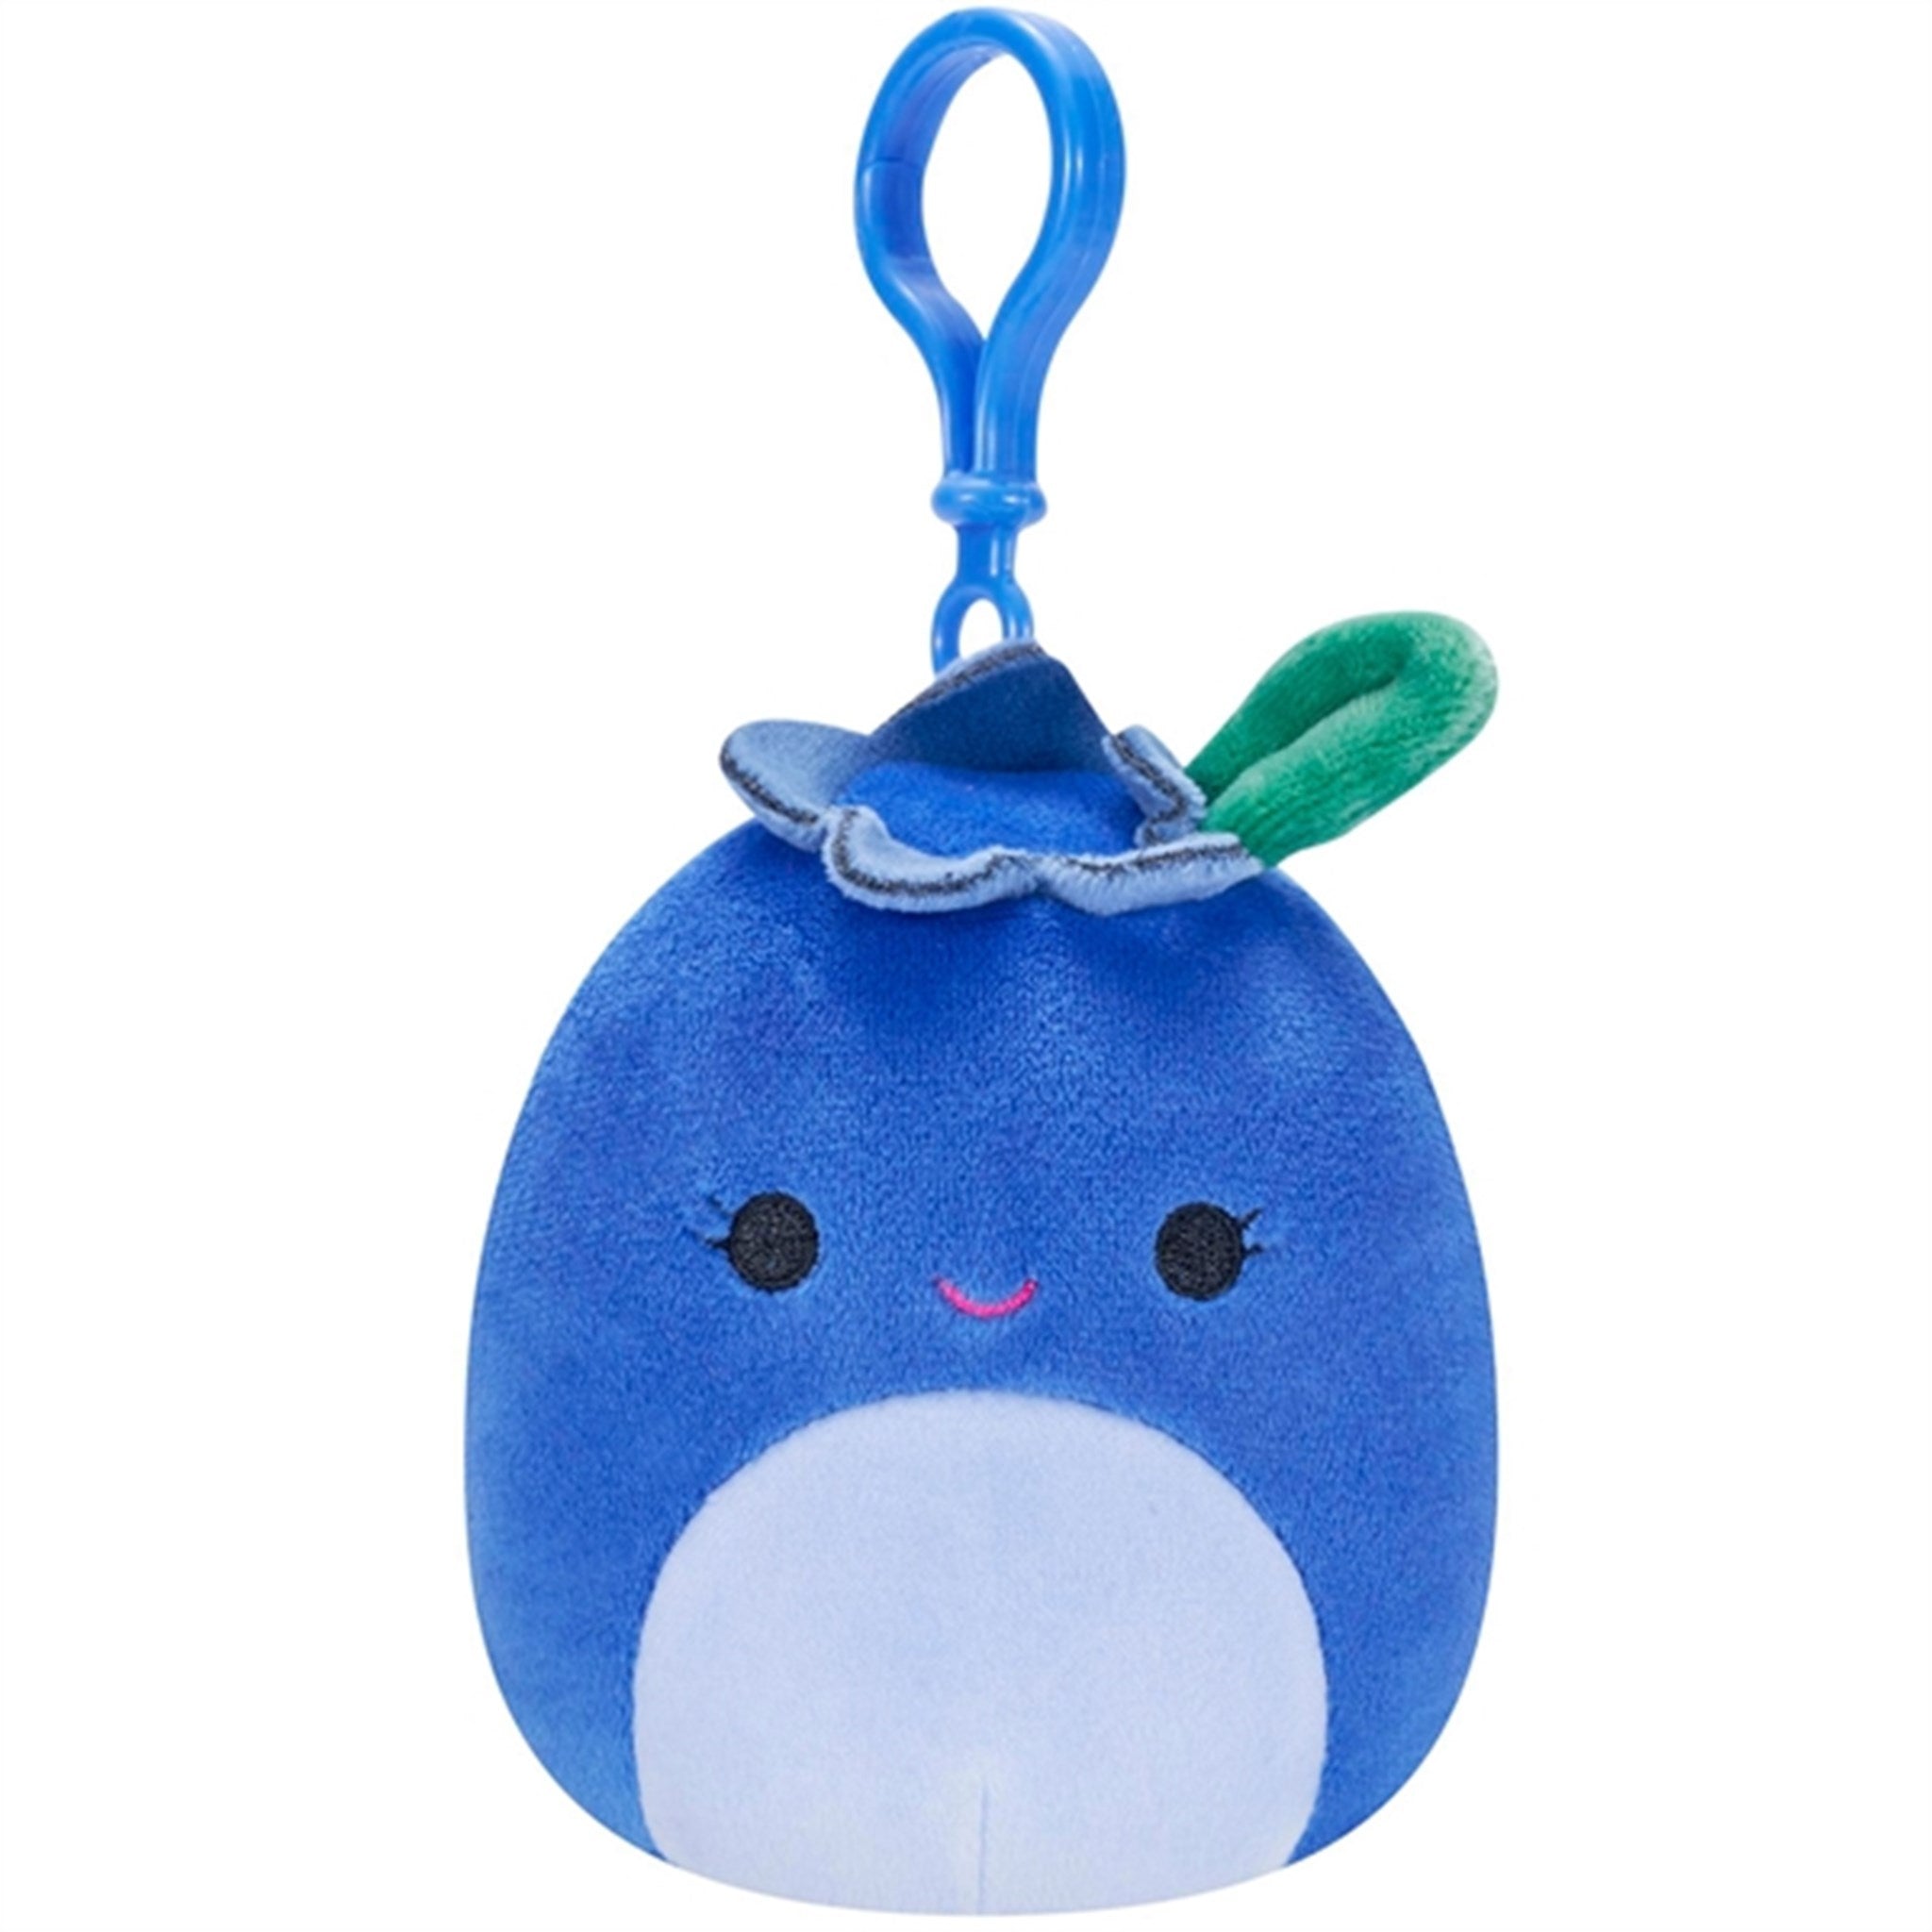 Squishmallows Bluby the Blueberry 9 cm